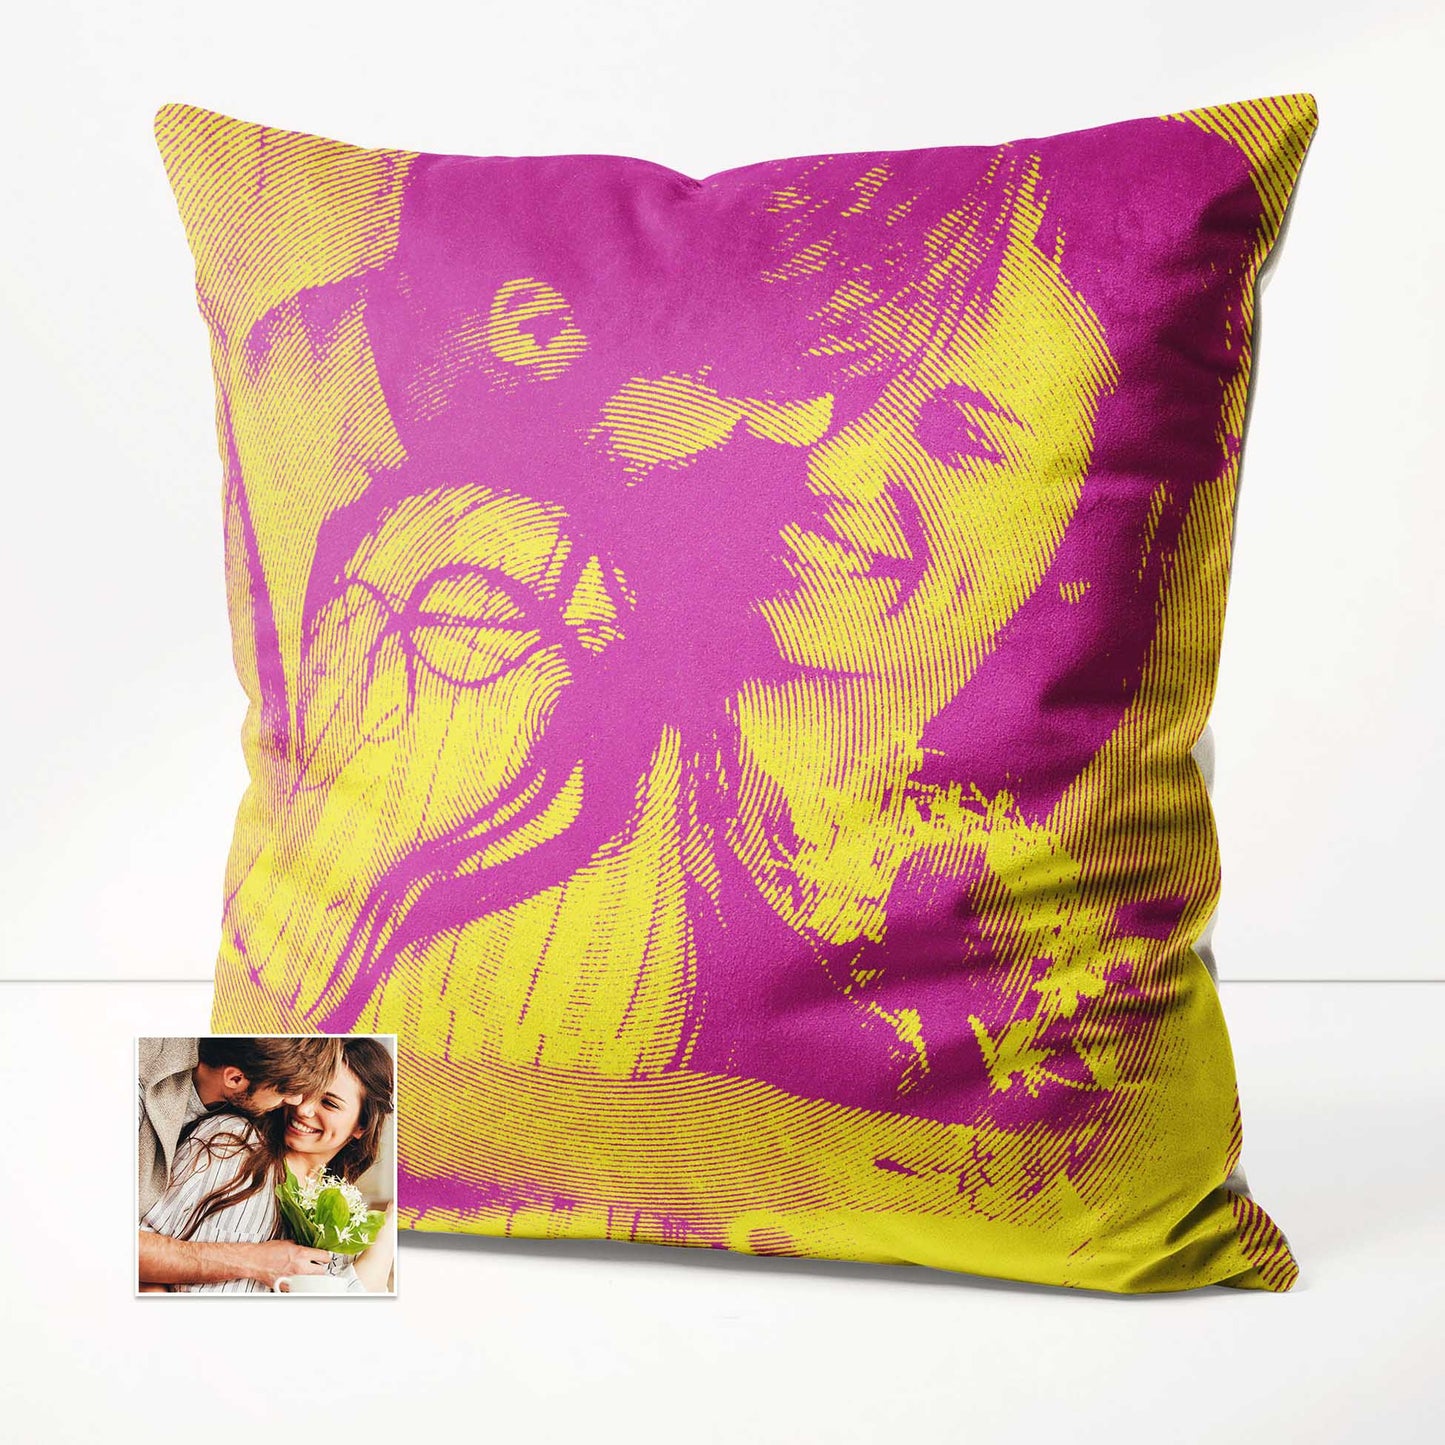 Add a touch of sunshine to your home with a Personalised Yellow & Pink Texture Cushion. Its soft velvet fabric and plush filling create a cozy and inviting atmosphere. Custom printed from your photo, it becomes a unique interior accent 